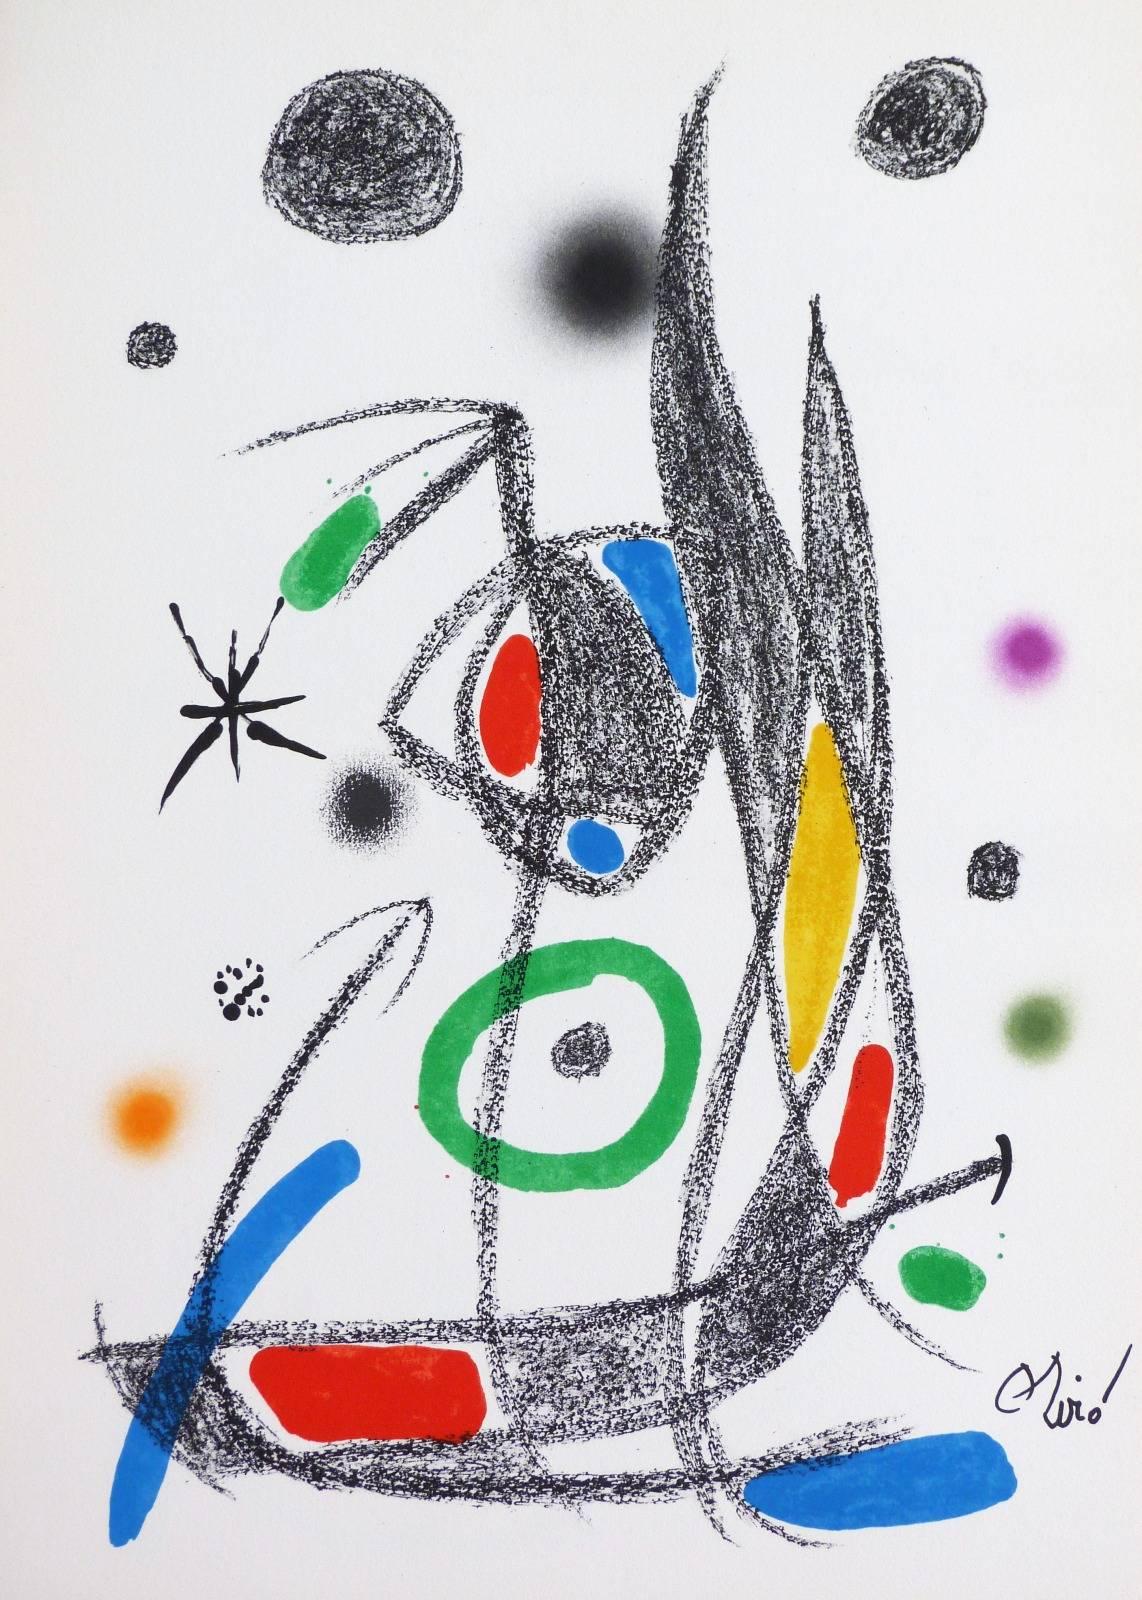 Joan Miró Abstract Print - Abstract Composition in black blue red yellow purple orange and green, 1975